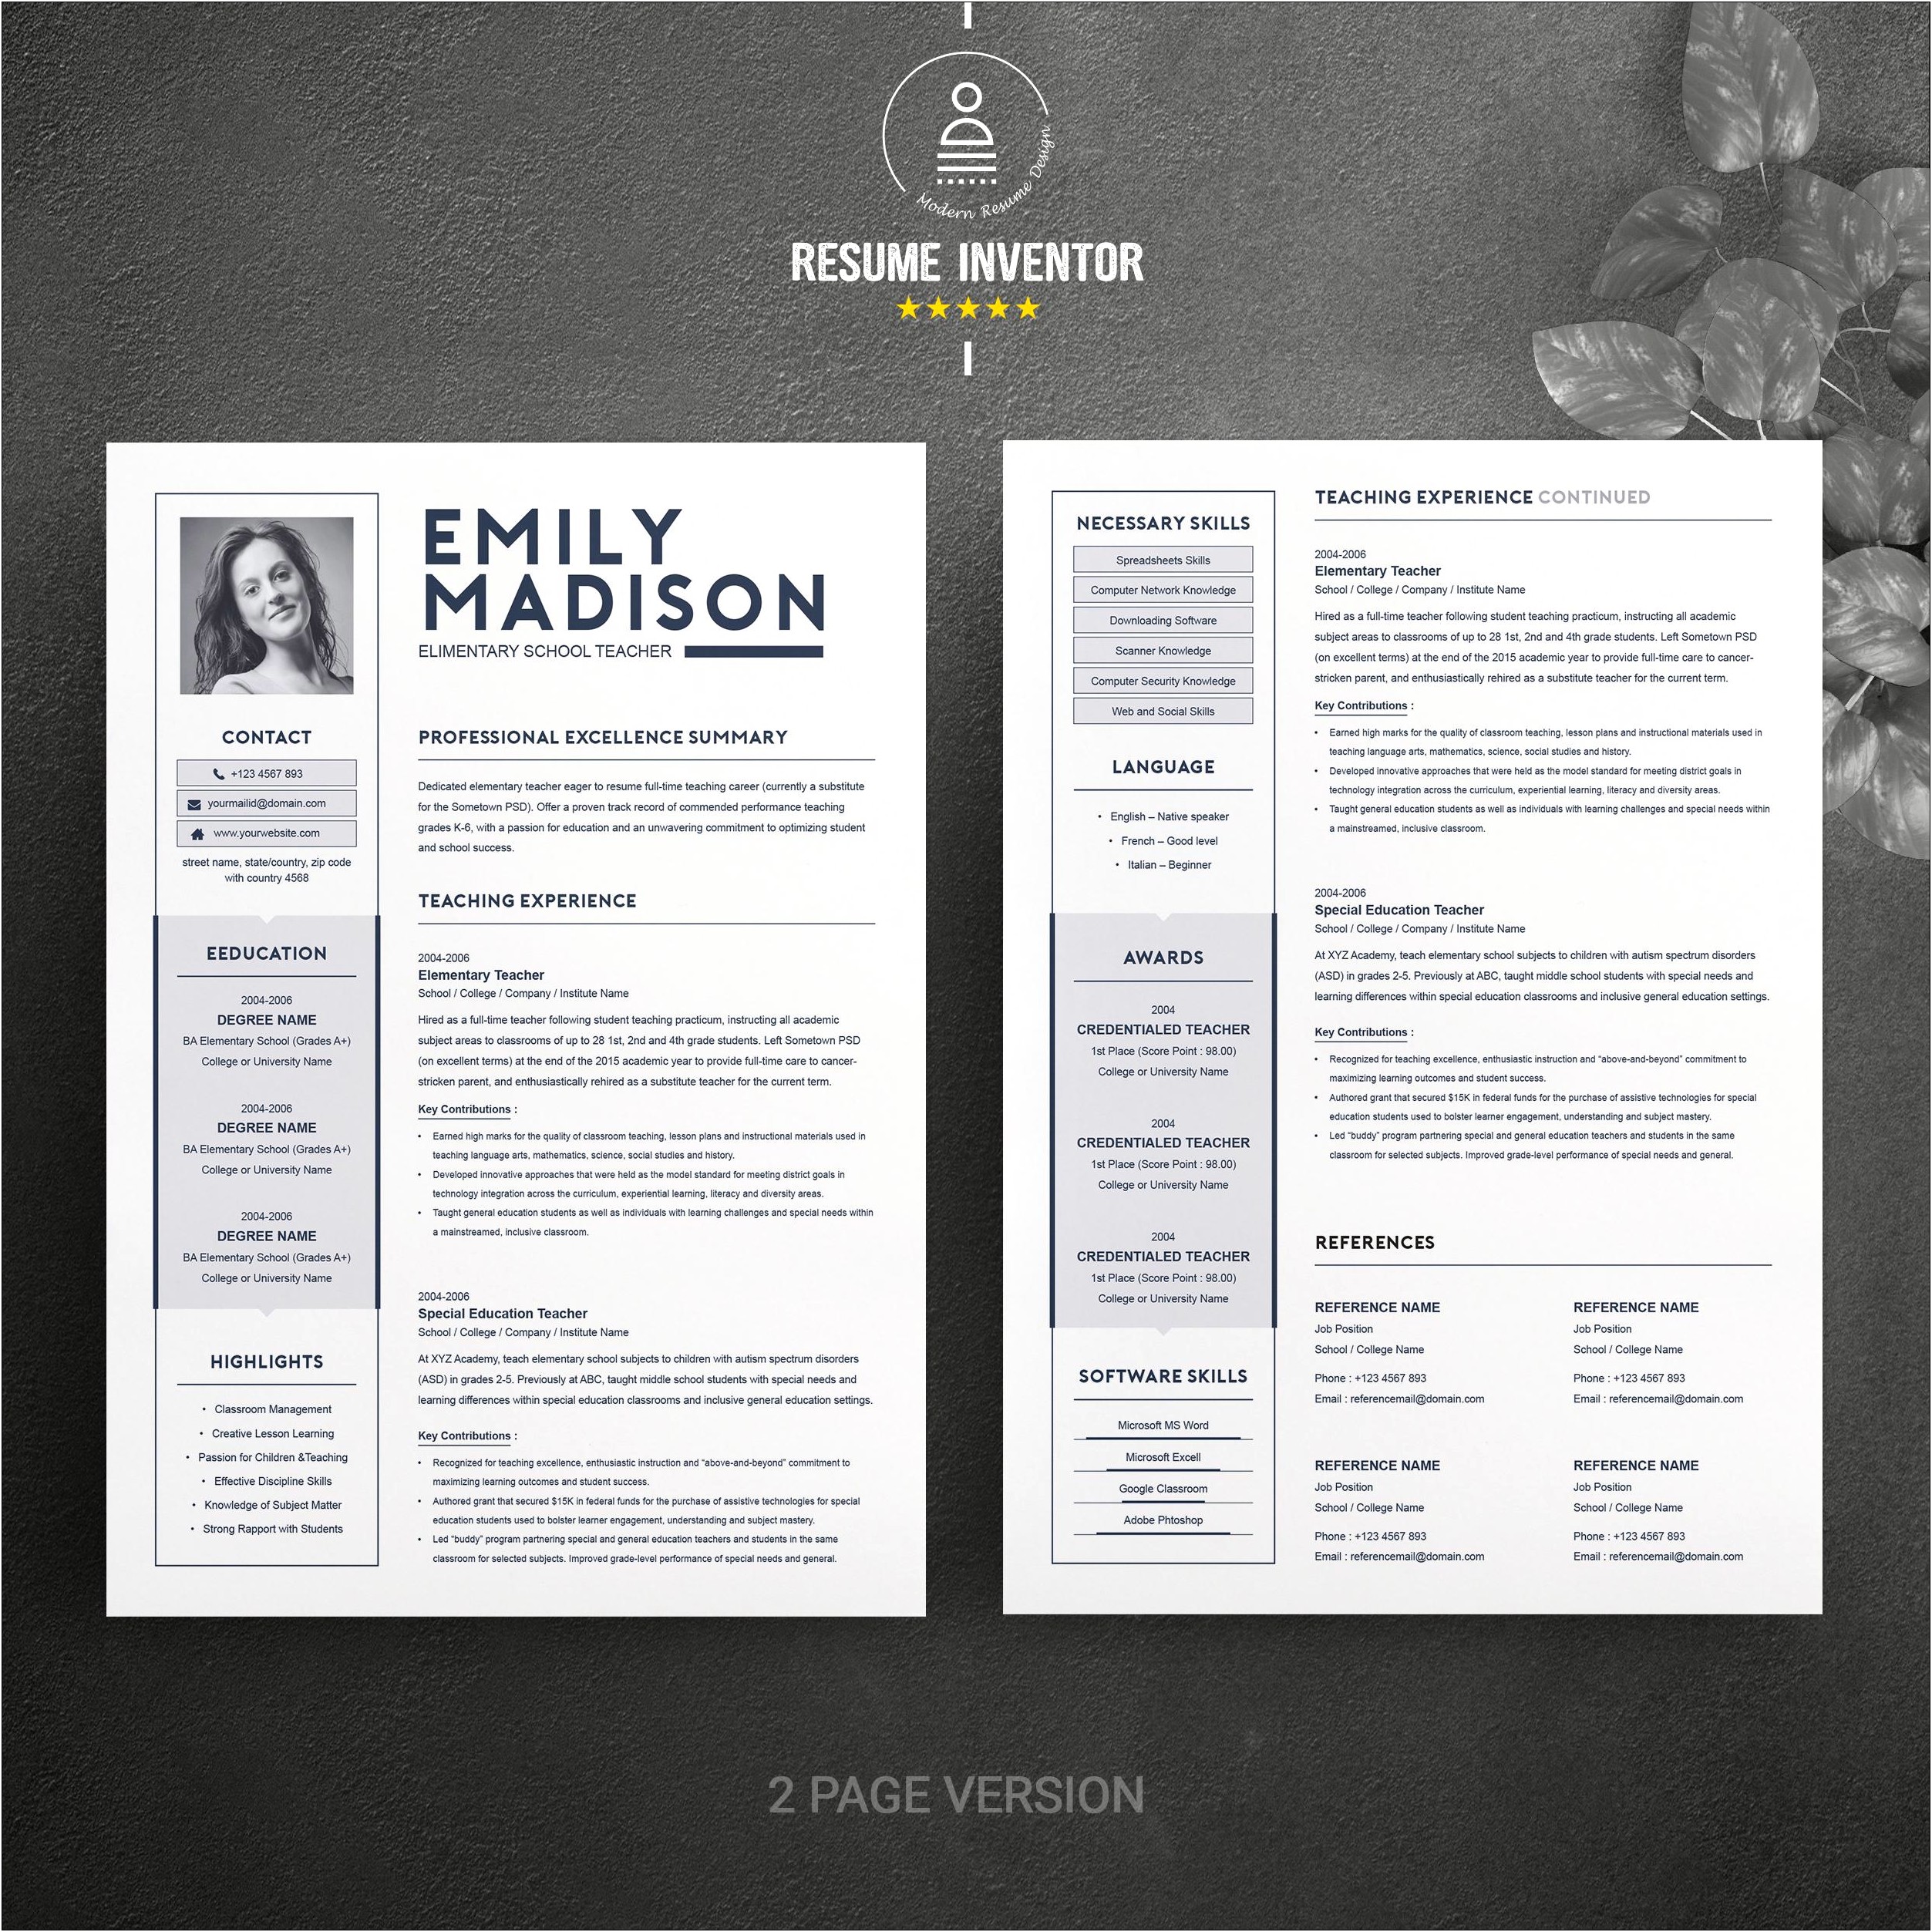 Free Downloadable Template For Elementary Teacher Resume